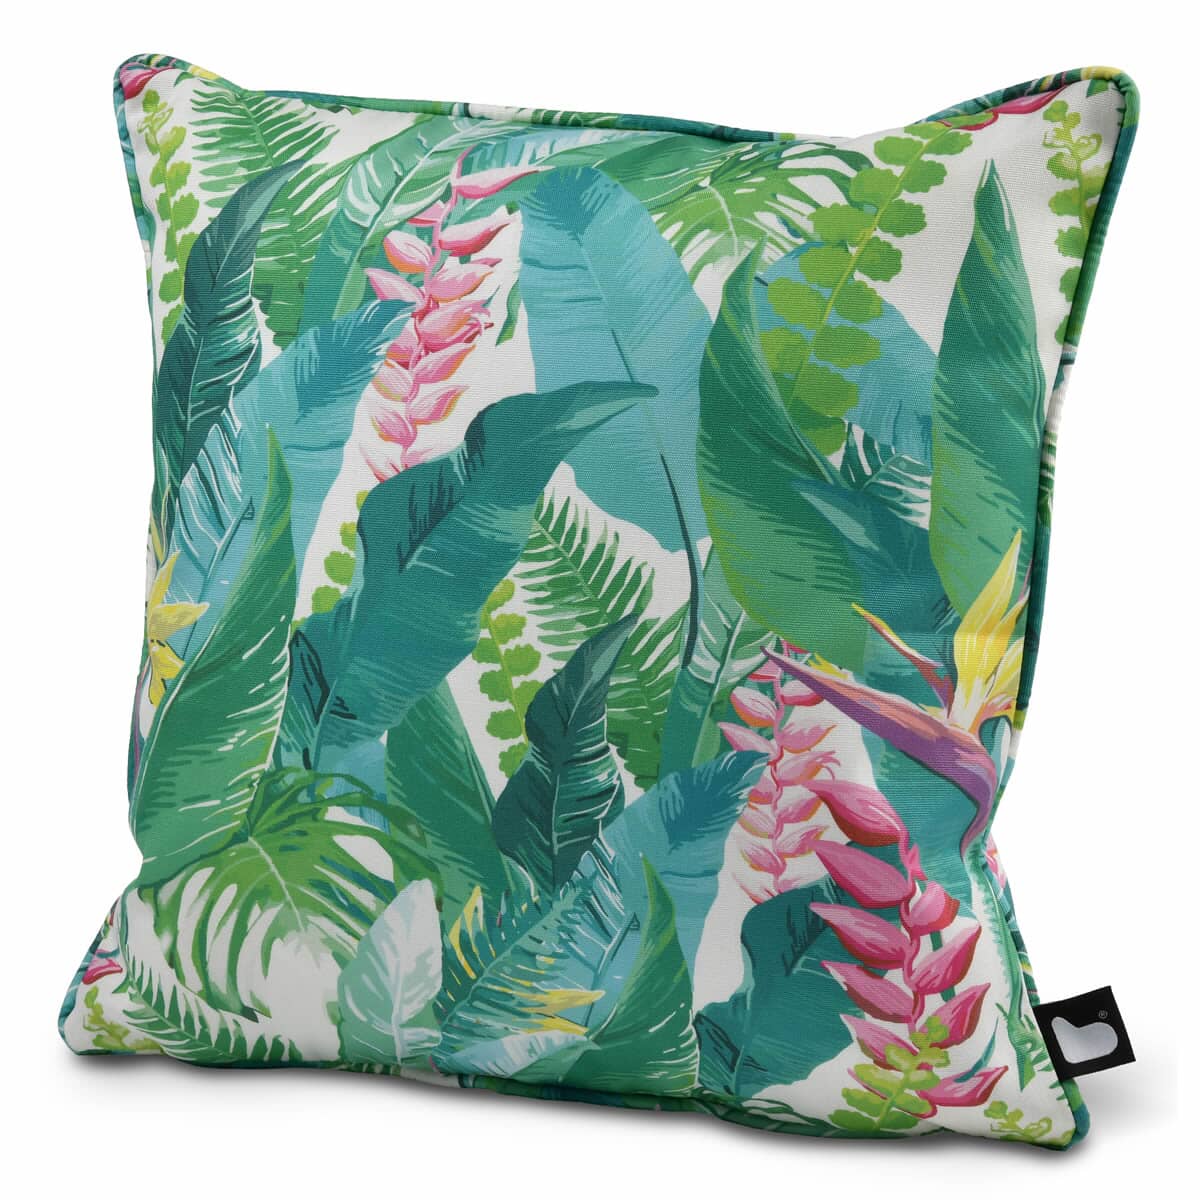 Extreme Lounging B Cushion Floral Jungle